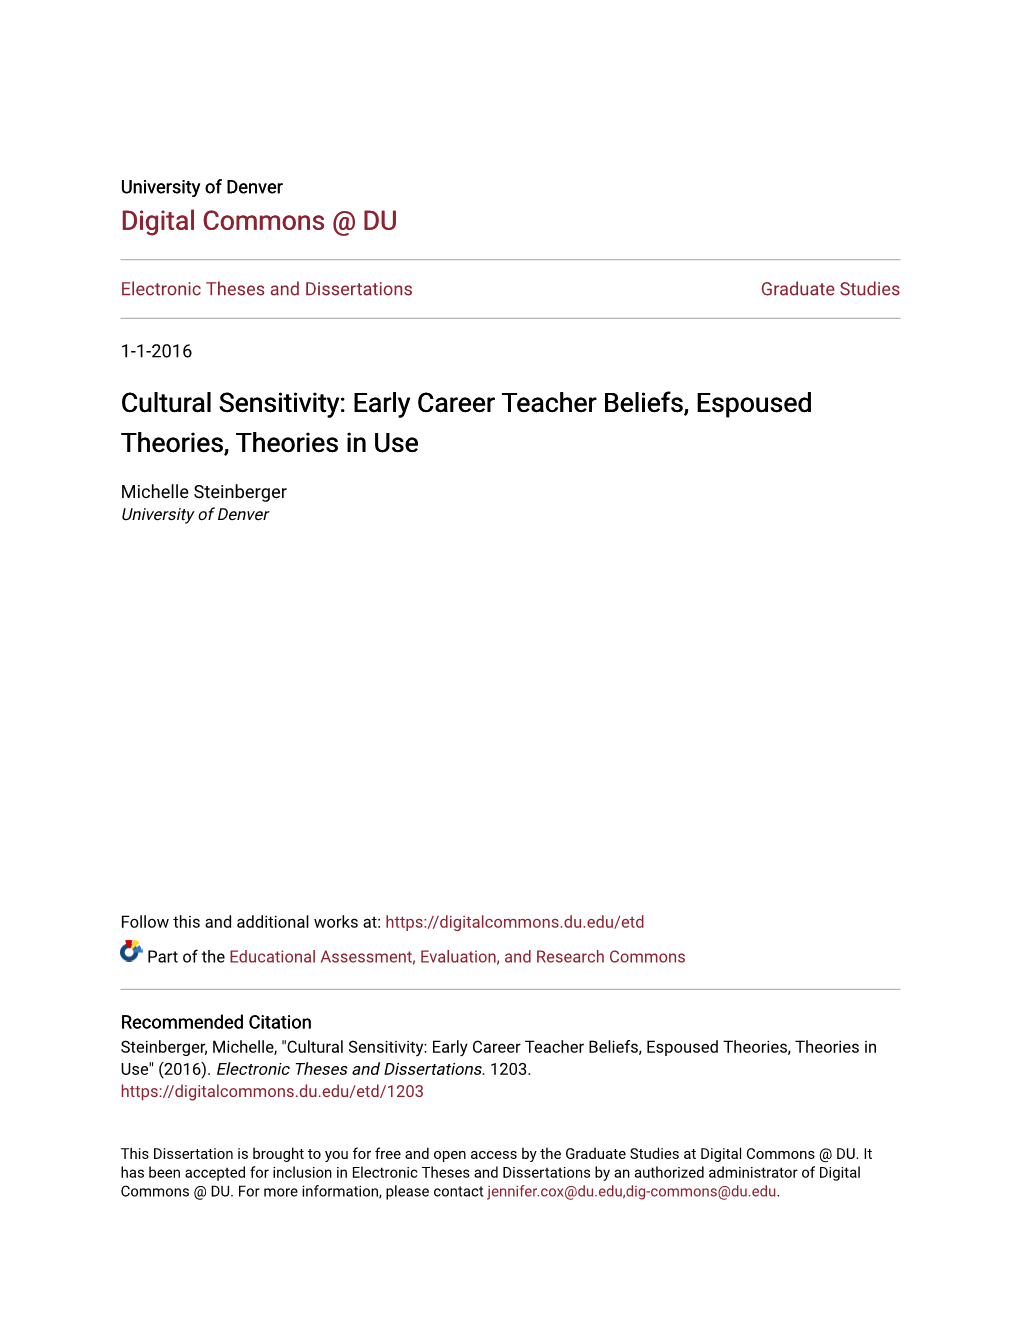 Cultural Sensitivity: Early Career Teacher Beliefs, Espoused Theories, Theories in Use